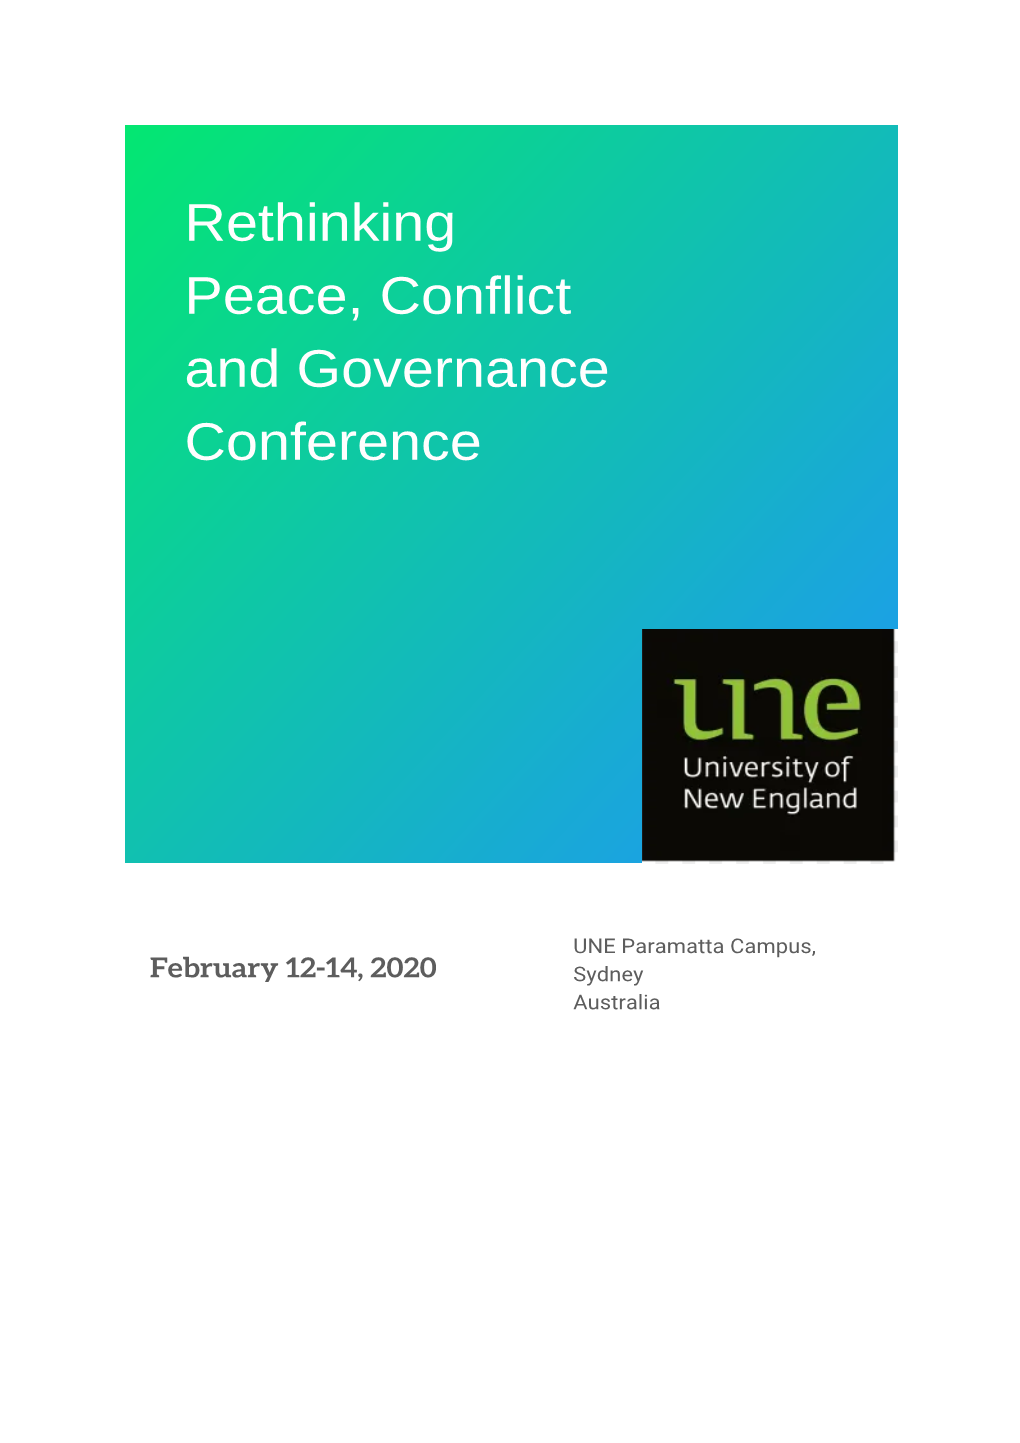 Rethinking Peace, Conflict and Governance Conference